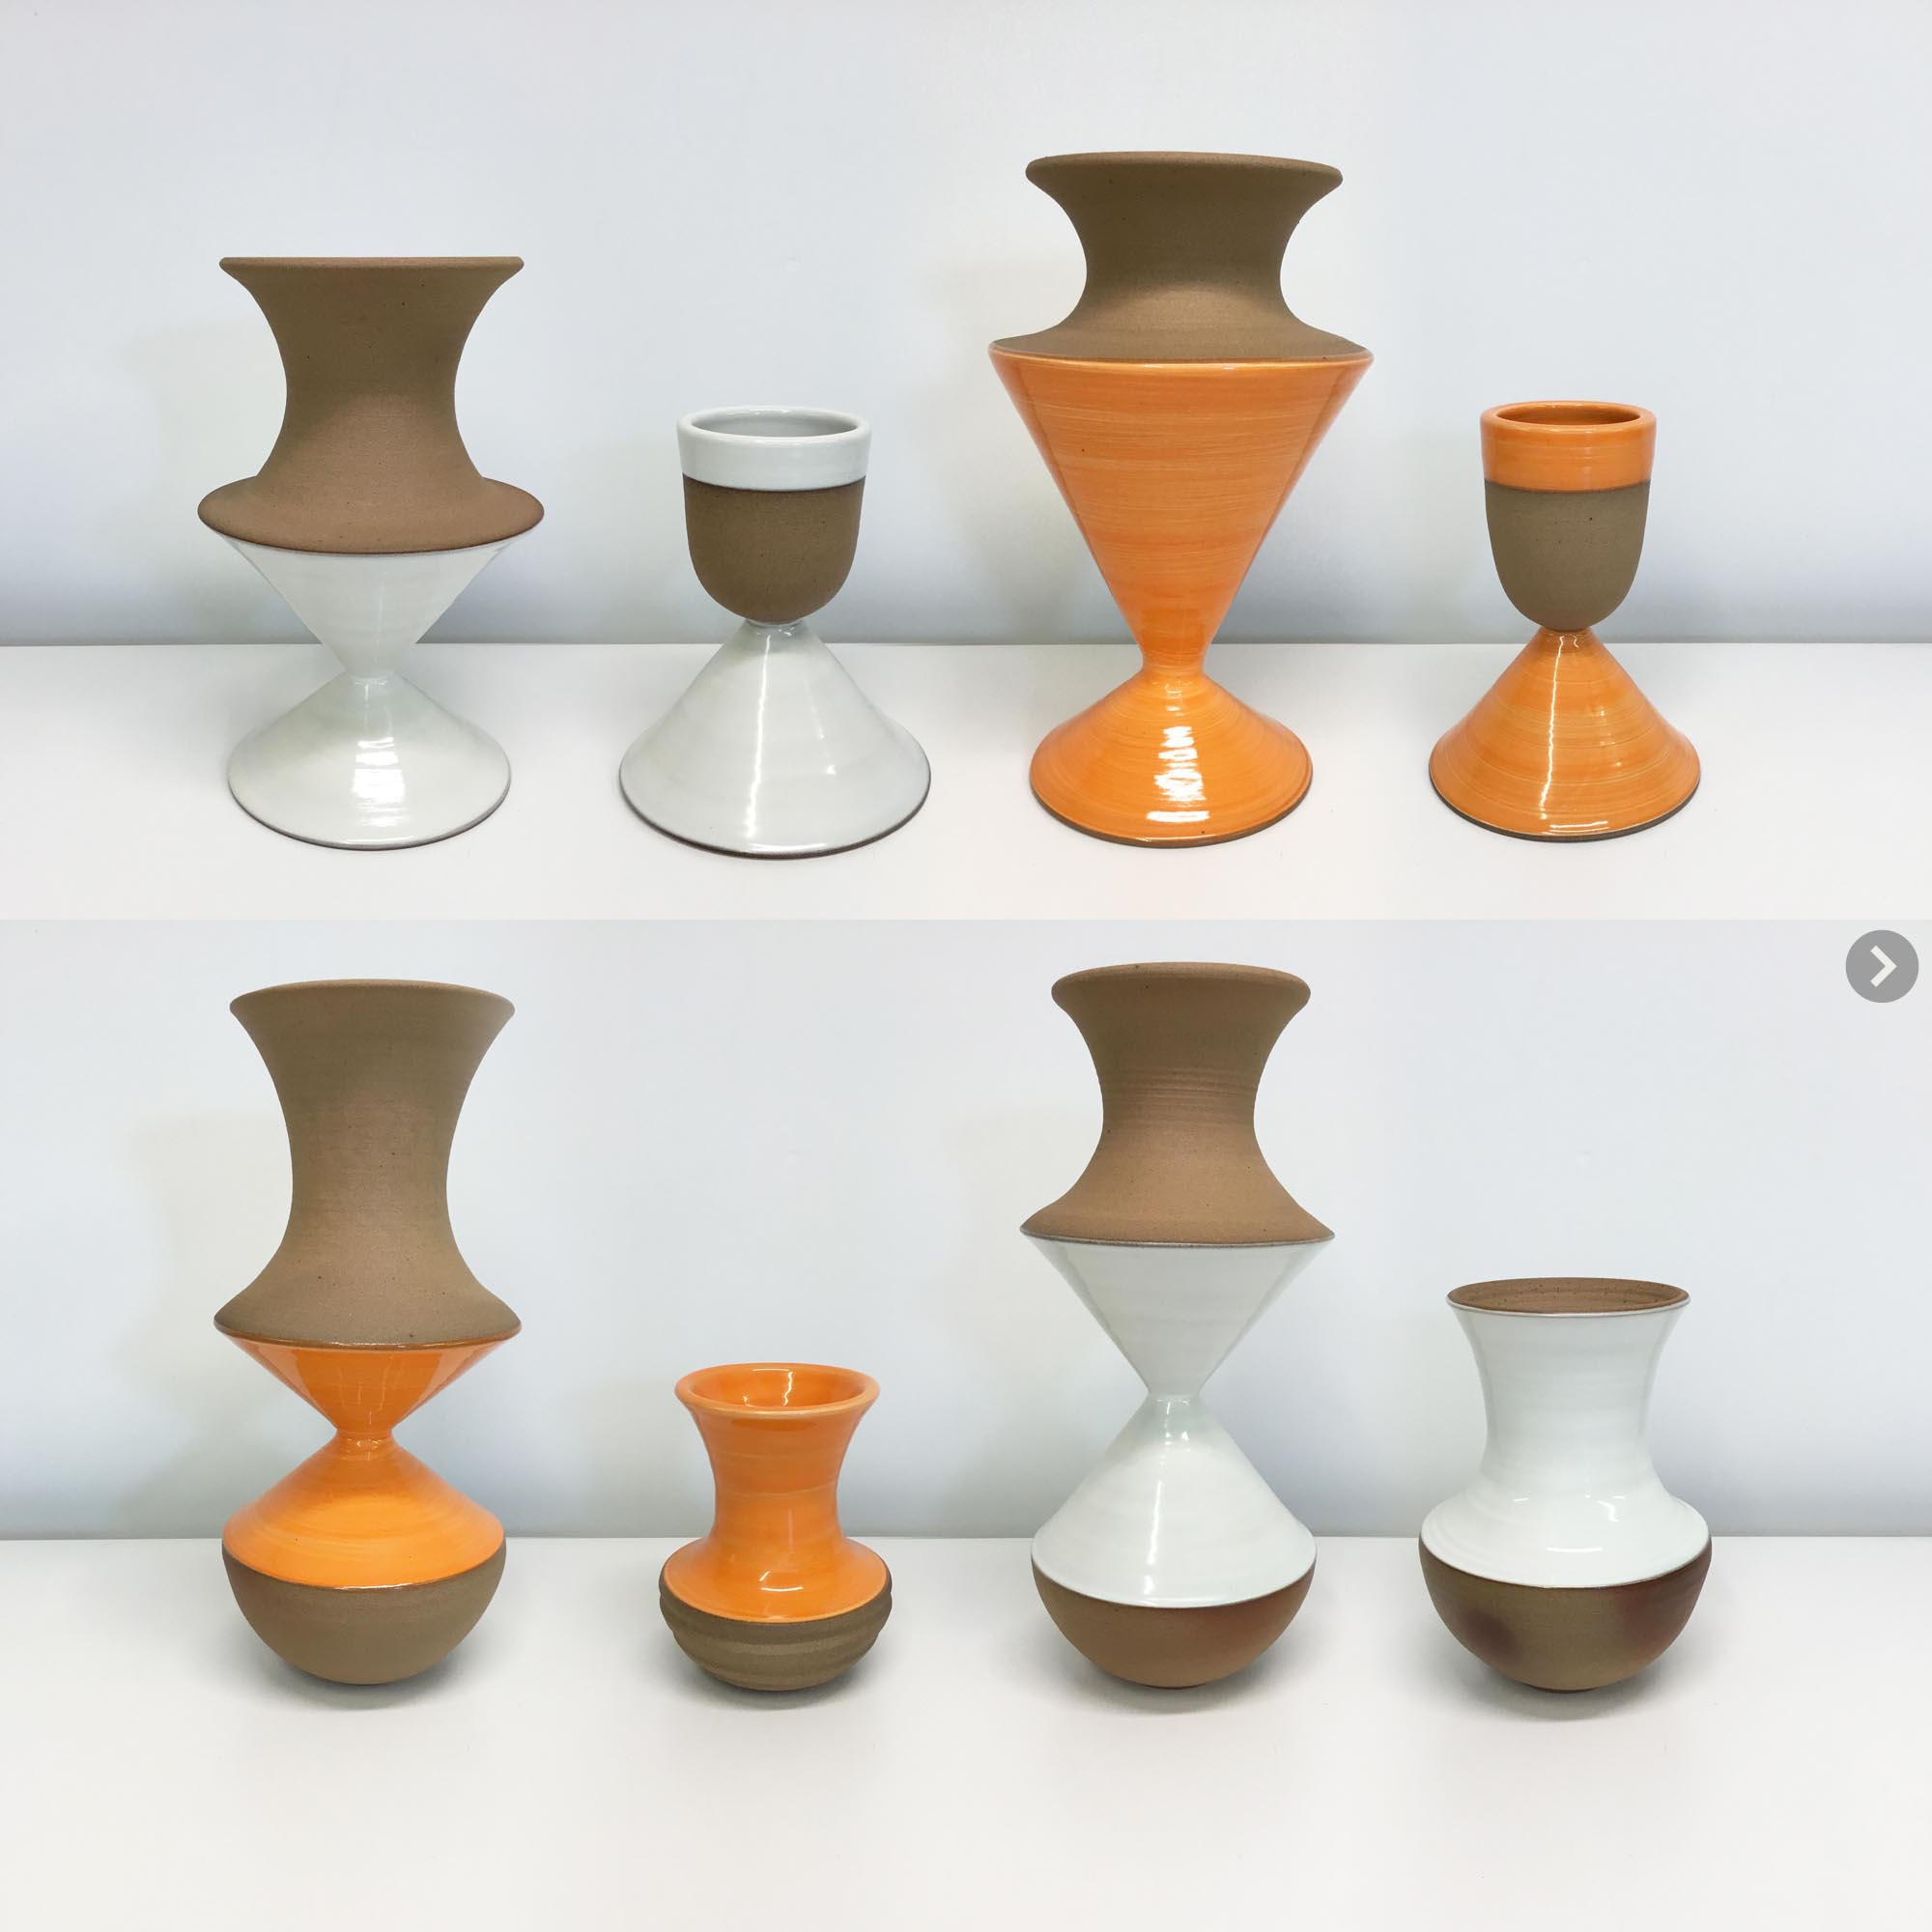 Handmade vases in a variety of bright glaze colors, complement mid-century modern decor. 3 to 12 inches tall, terra cotta or white stoneware, pottery decor.